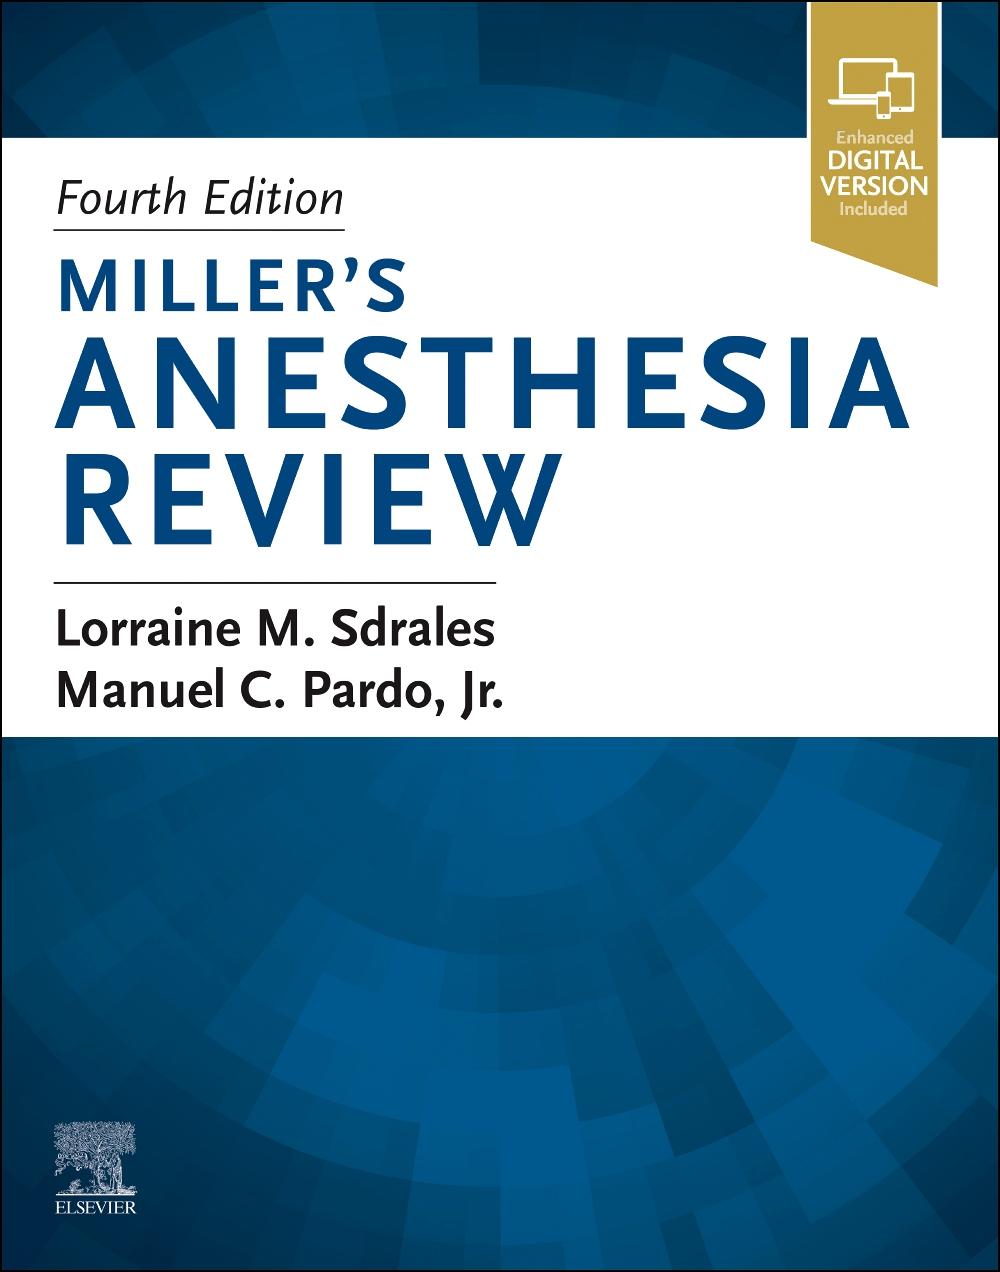 Könyv Miller's Anesthesia Review Lorraine M. Sdrales